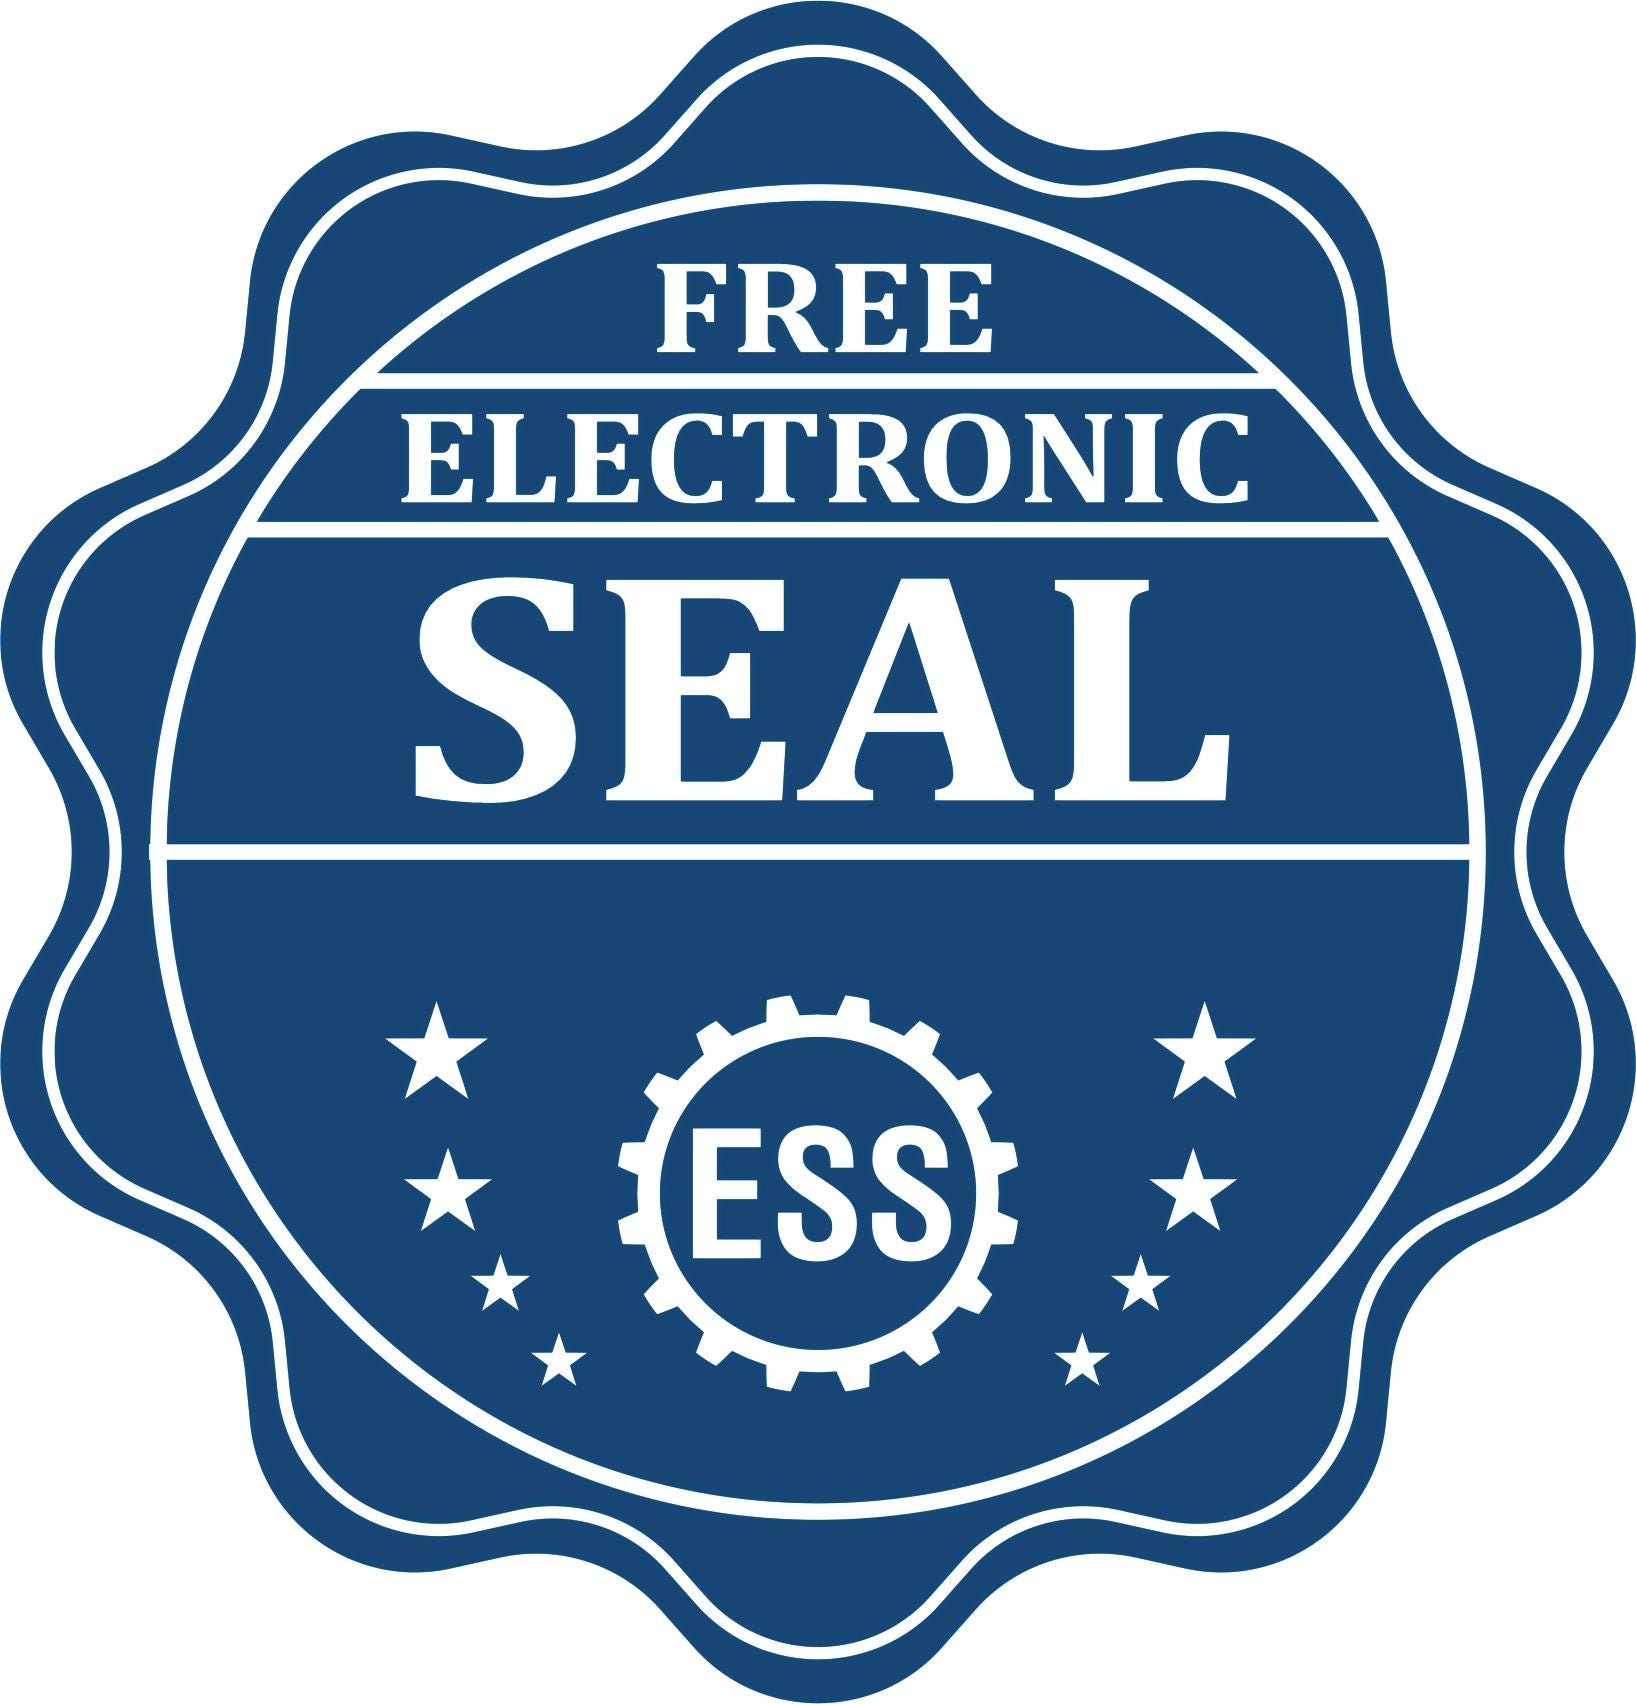 A badge showing a free electronic seal for the Heavy Duty Cast Iron Arkansas Architect Embosser with stars and the ESS gear on the emblem.